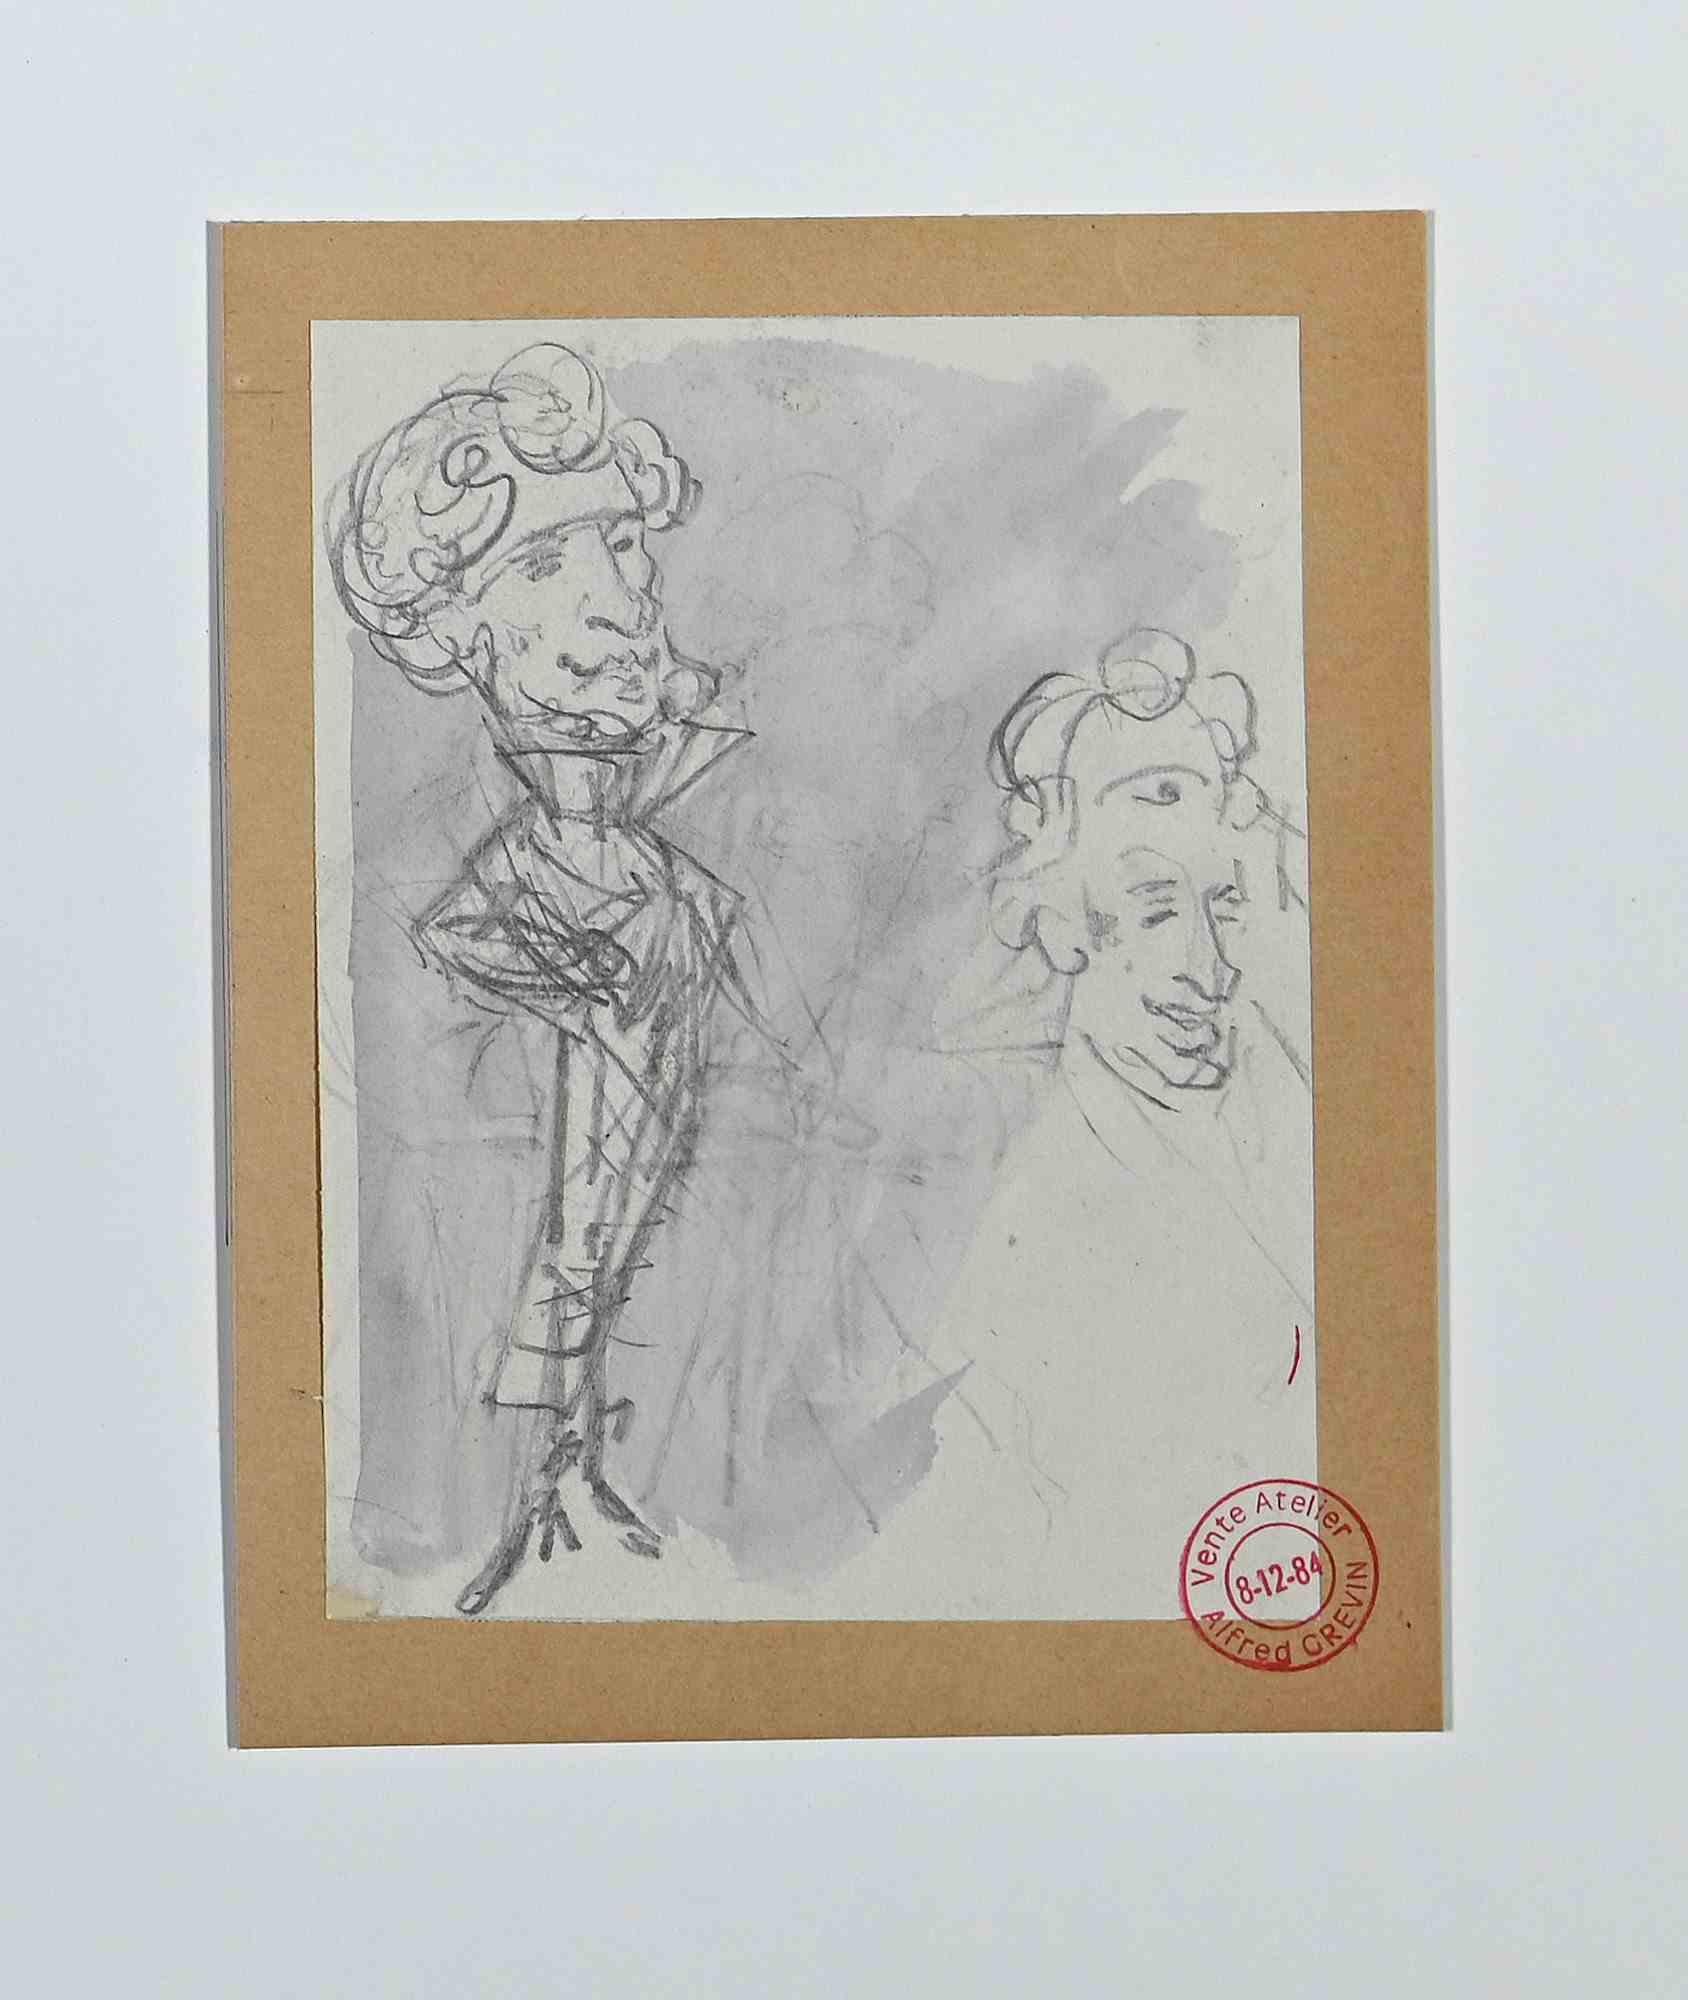 Portraits is an original drawing in Pencil and watercolor realized by Alfred Grévin in the Late-19 Century.

Applied on a Passeprtout:36 x 26 cm.

With the stamp of atelier "Grevin" on the lower right.

In good conditions.

Alfred Grévin  (1827-